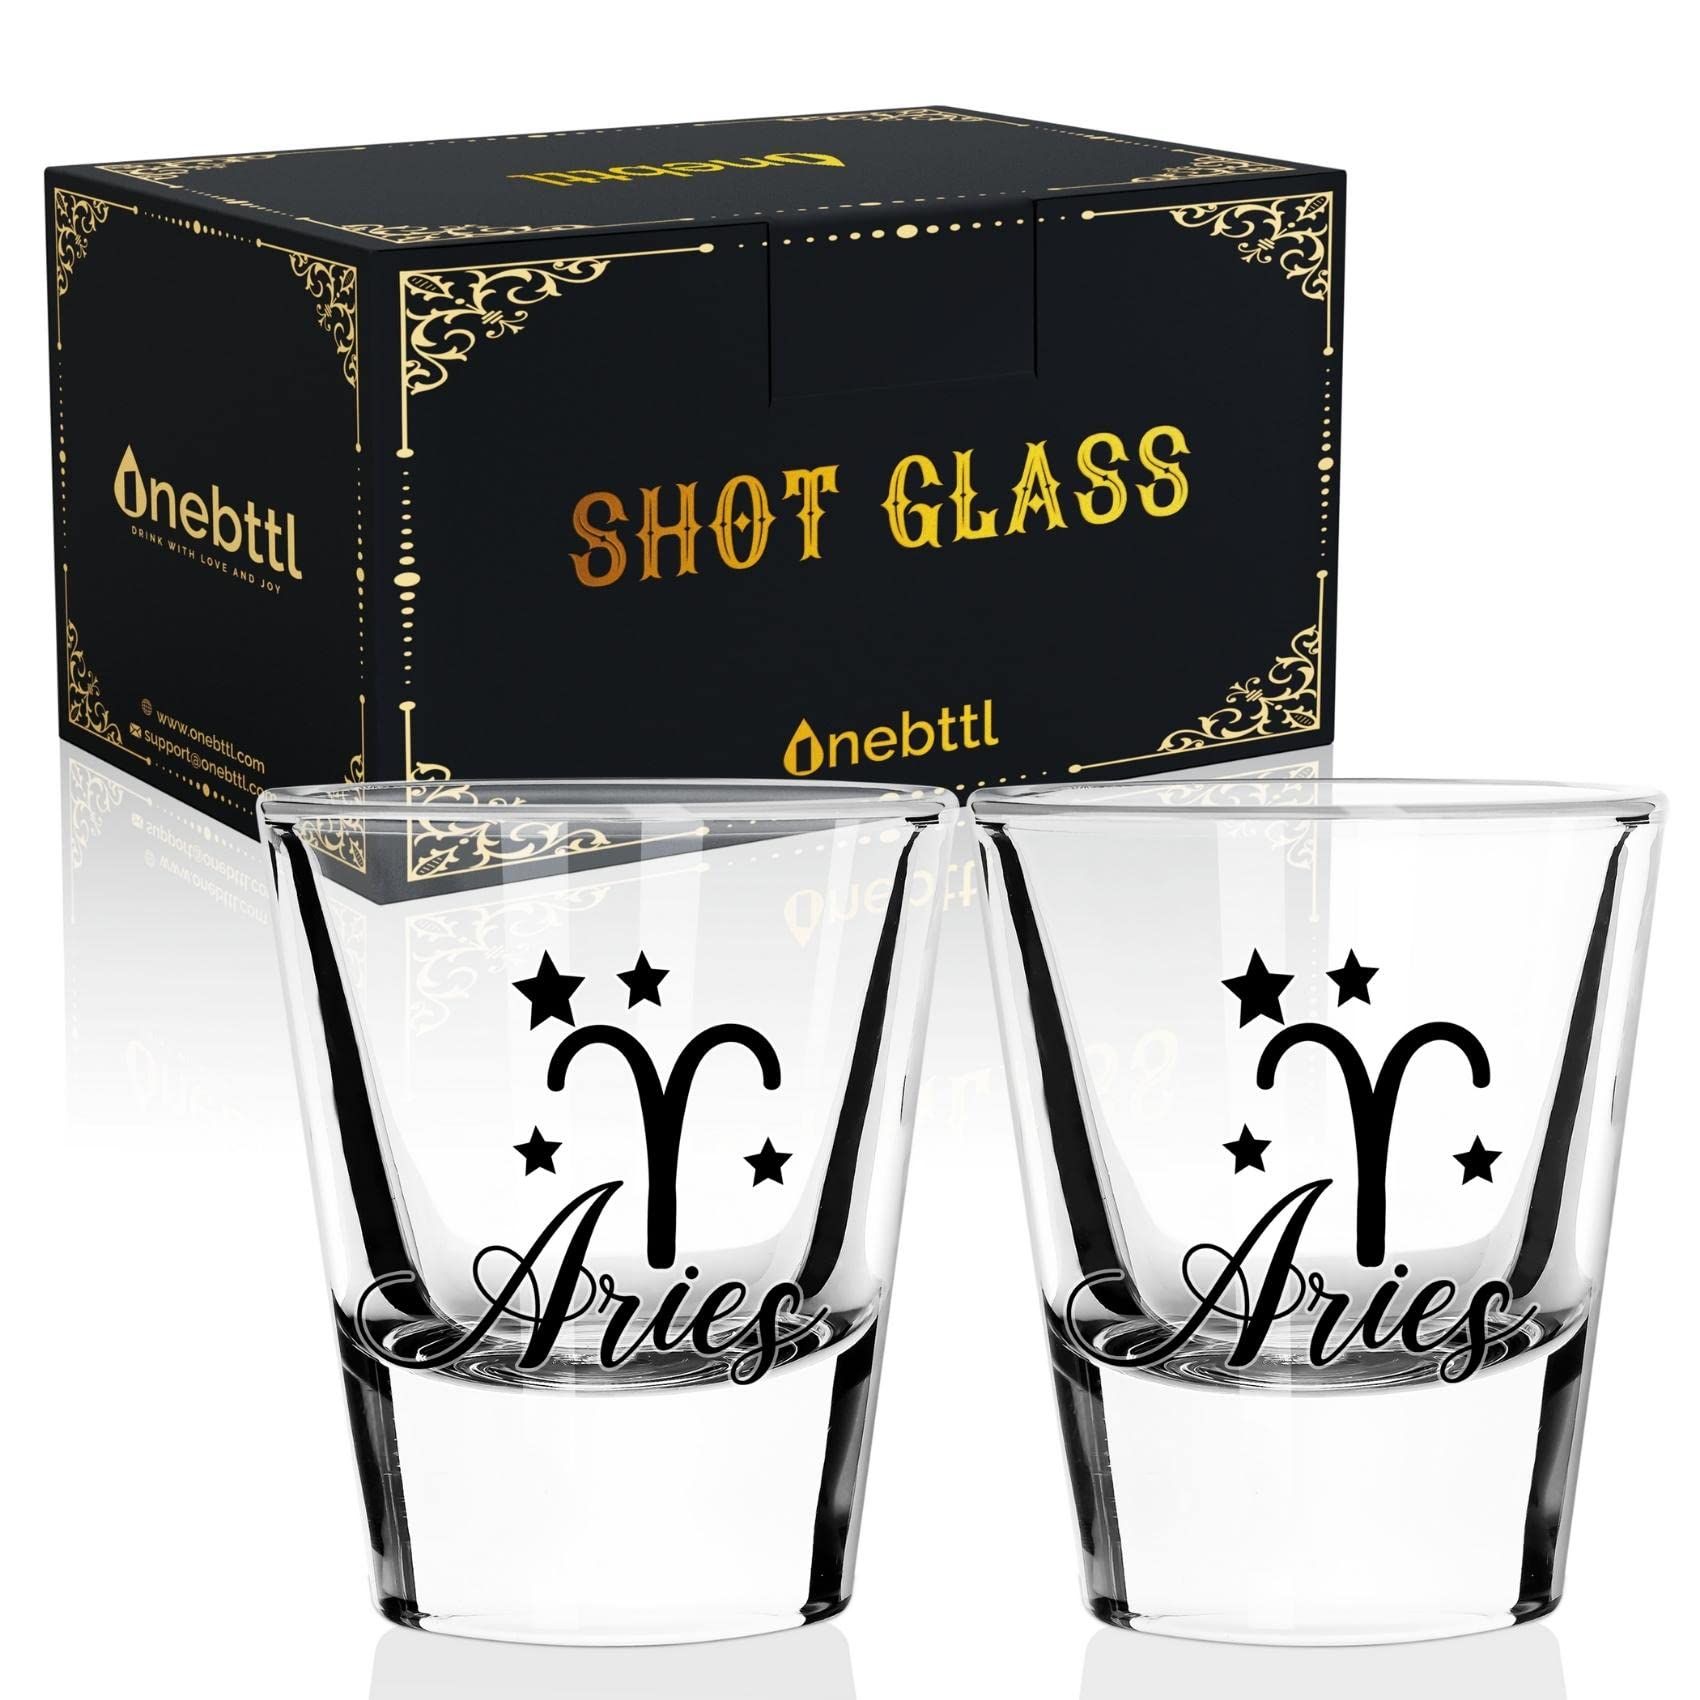 Onebttl Zodiac Sign Shot Glass Set of 2, Unique Birthday Gifts for Women, Men, Friend, Coworker, ... | Amazon (US)